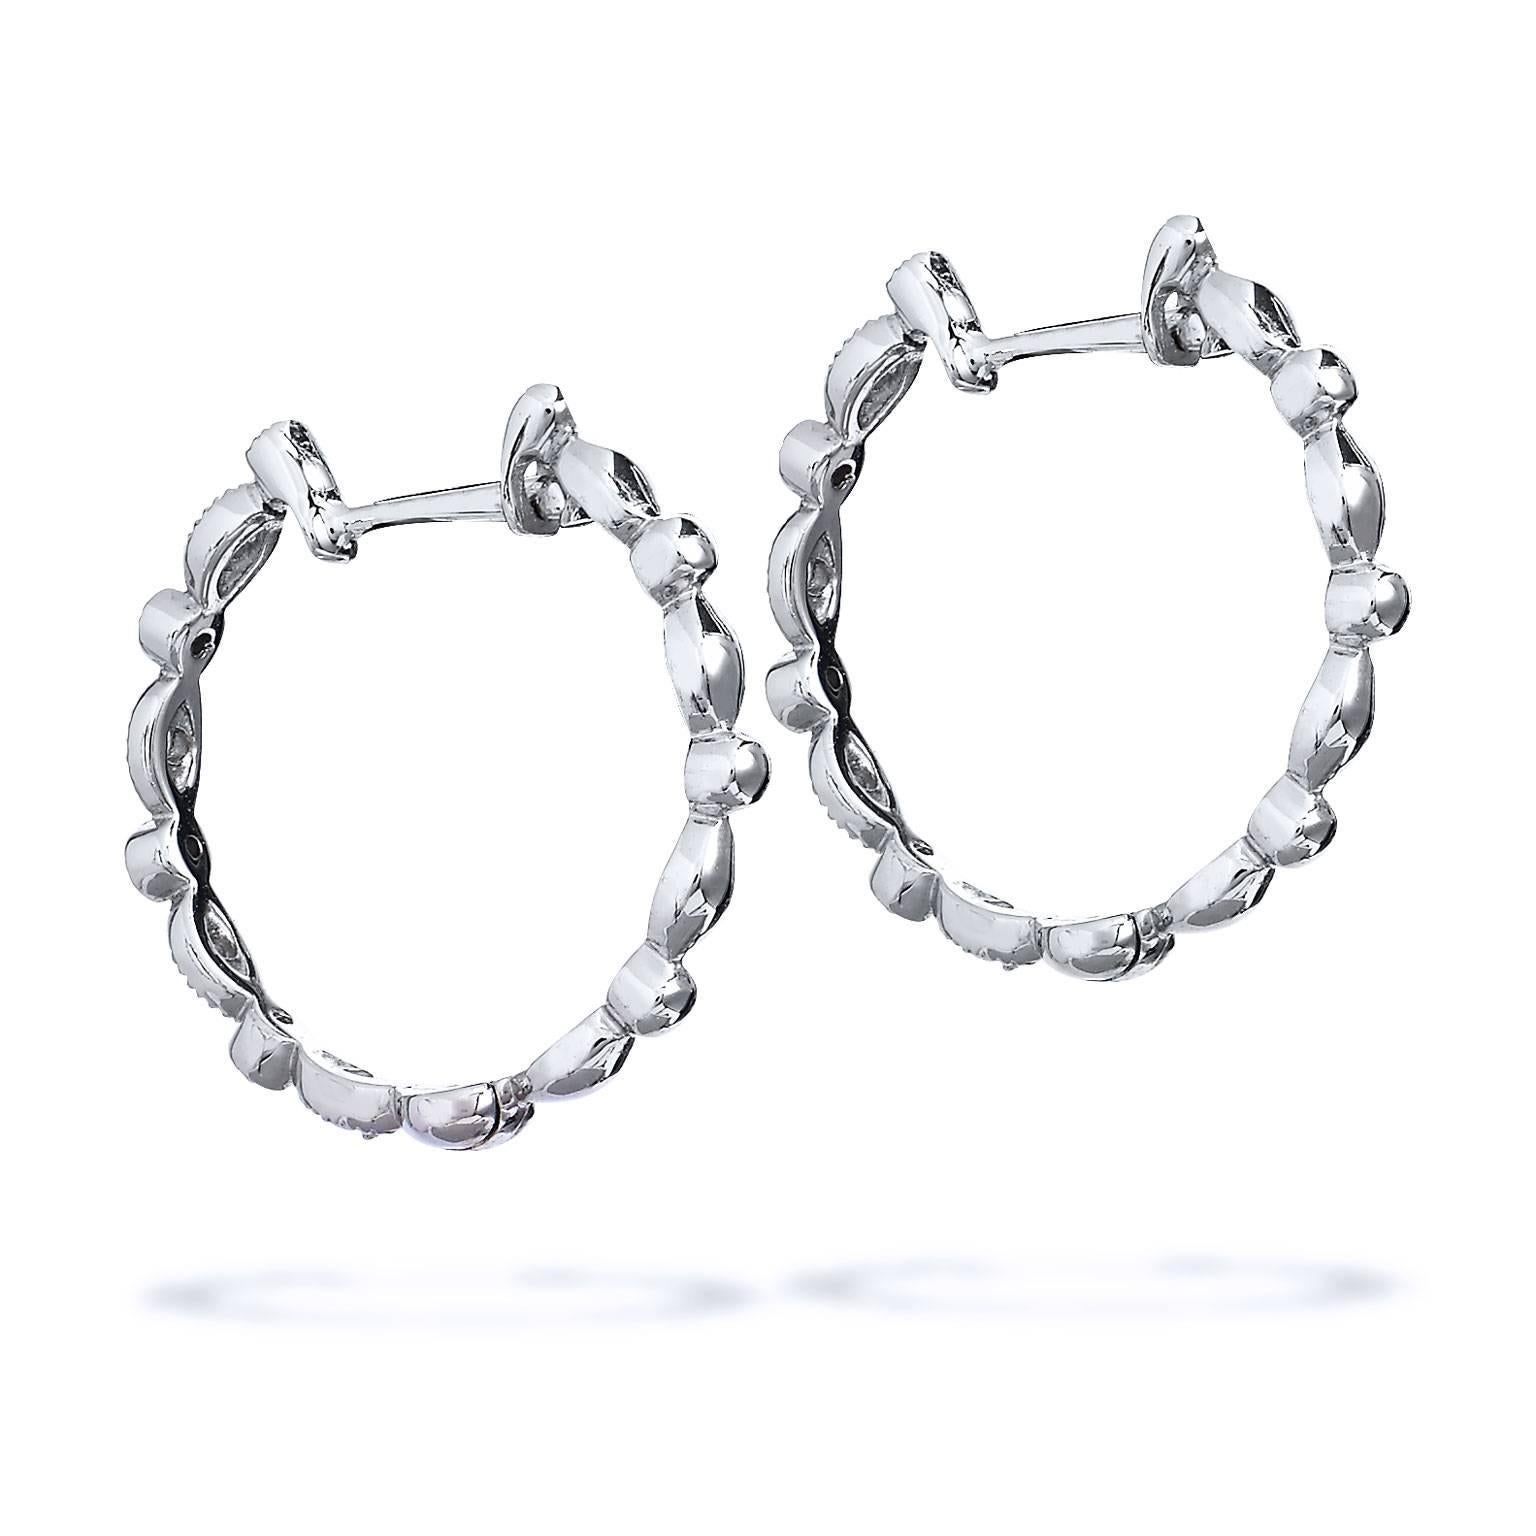 Jude Frances eighteen karat white gold diamond hoops. These Cleopatra style hoops hold sixteen round brilliant cut natural diamonds weighing a total of 0.16 carat.

Diameter 20 mm 